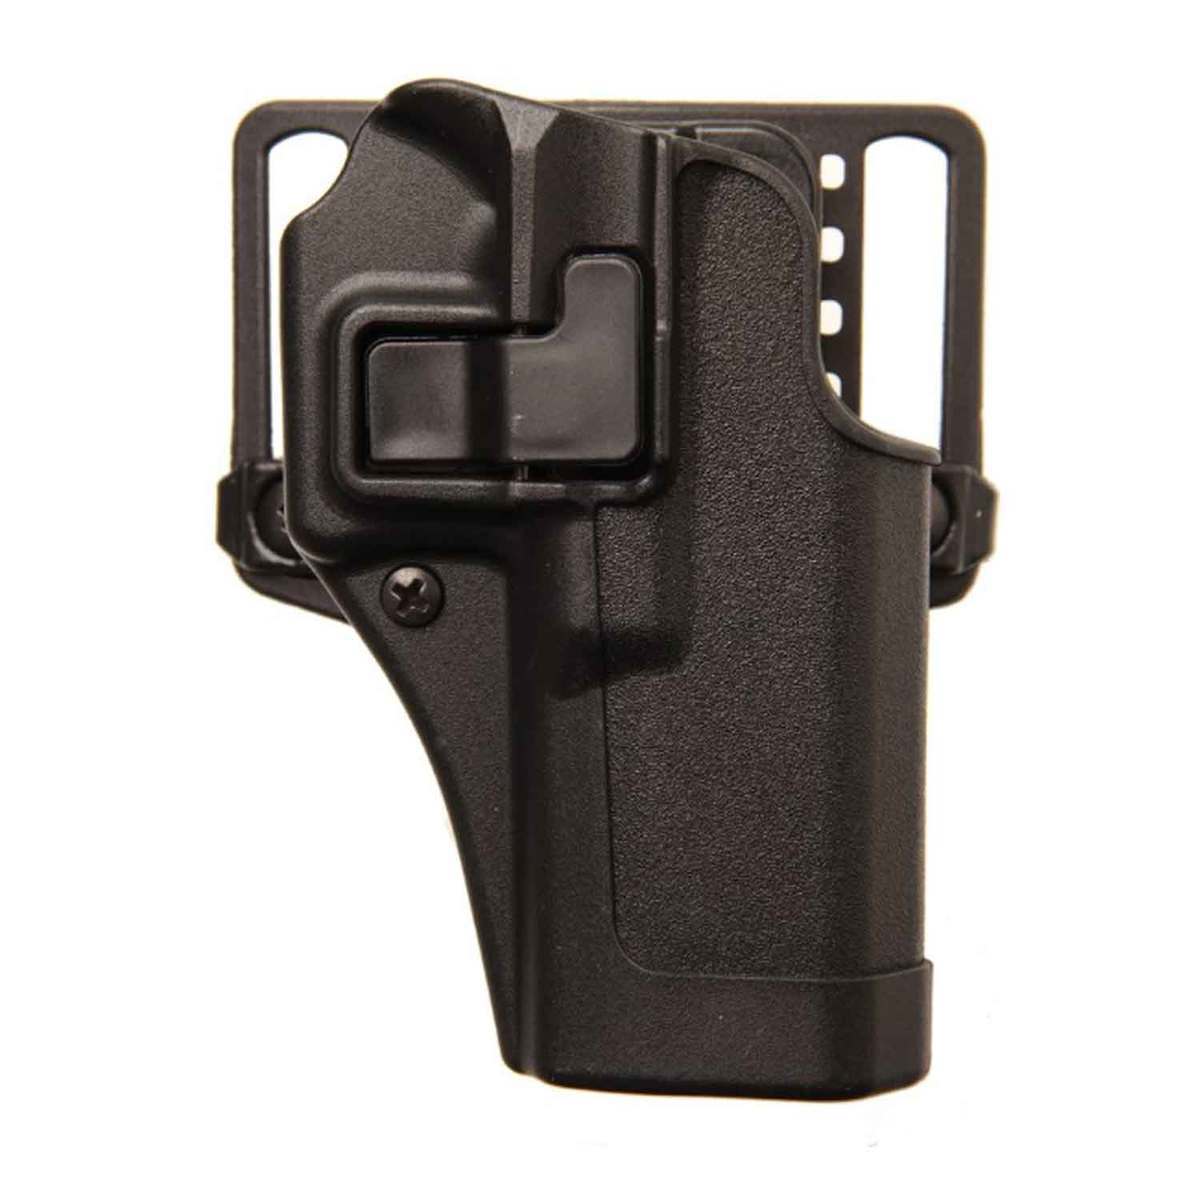  Black Jacket Holsters for Glock 17/22, Inside Waistband  Concealed Carry Holster